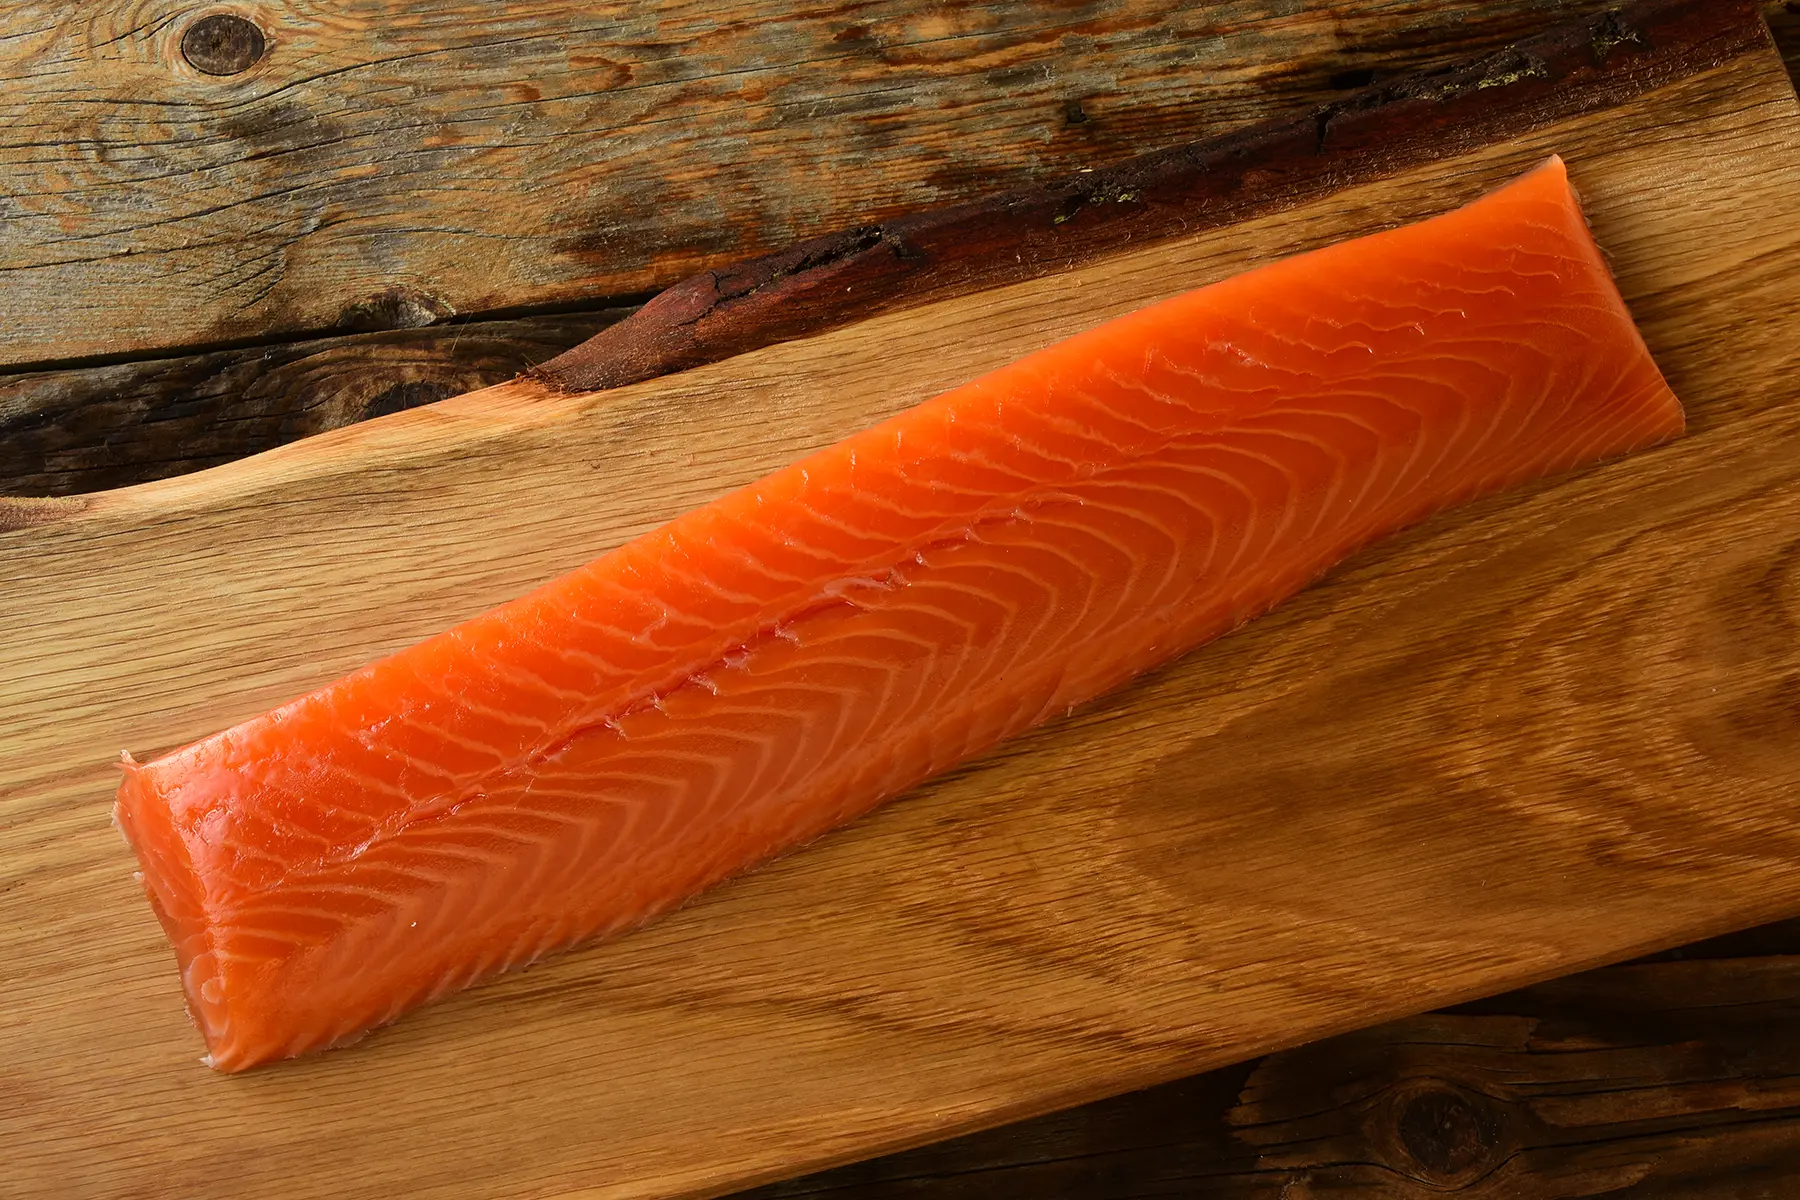 tsar fillet smoked salmon - What is the best cut of smoked salmon